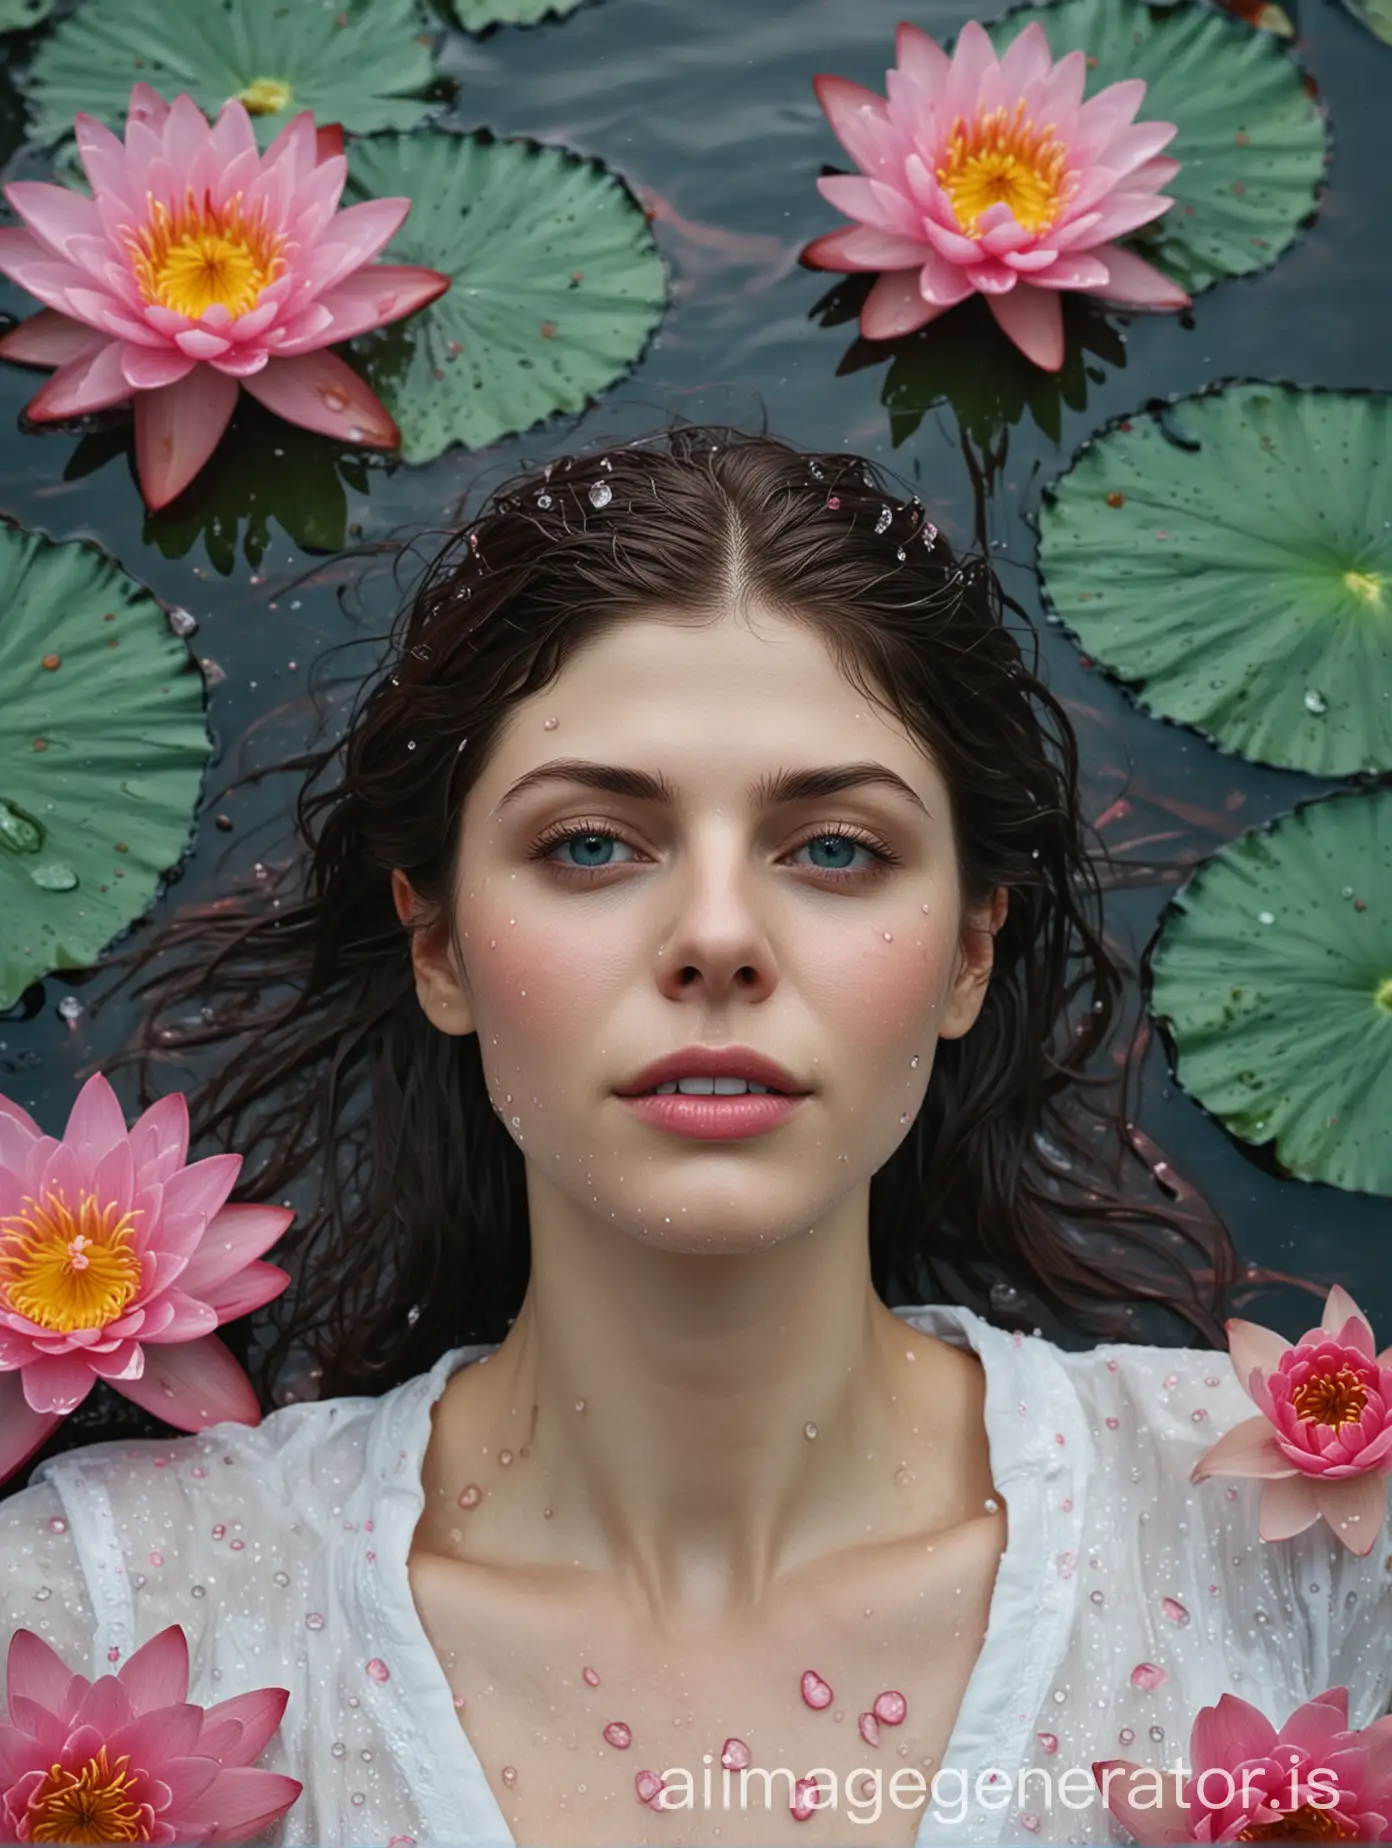 haflbody view, alexandra daddario face, woman's face wet, woman hair in turquoise color, woman lying in waterpond, surrounded by a big pink water lily flowers, woman wearing white nightgown, water lilies are heavily covered in dewdrops